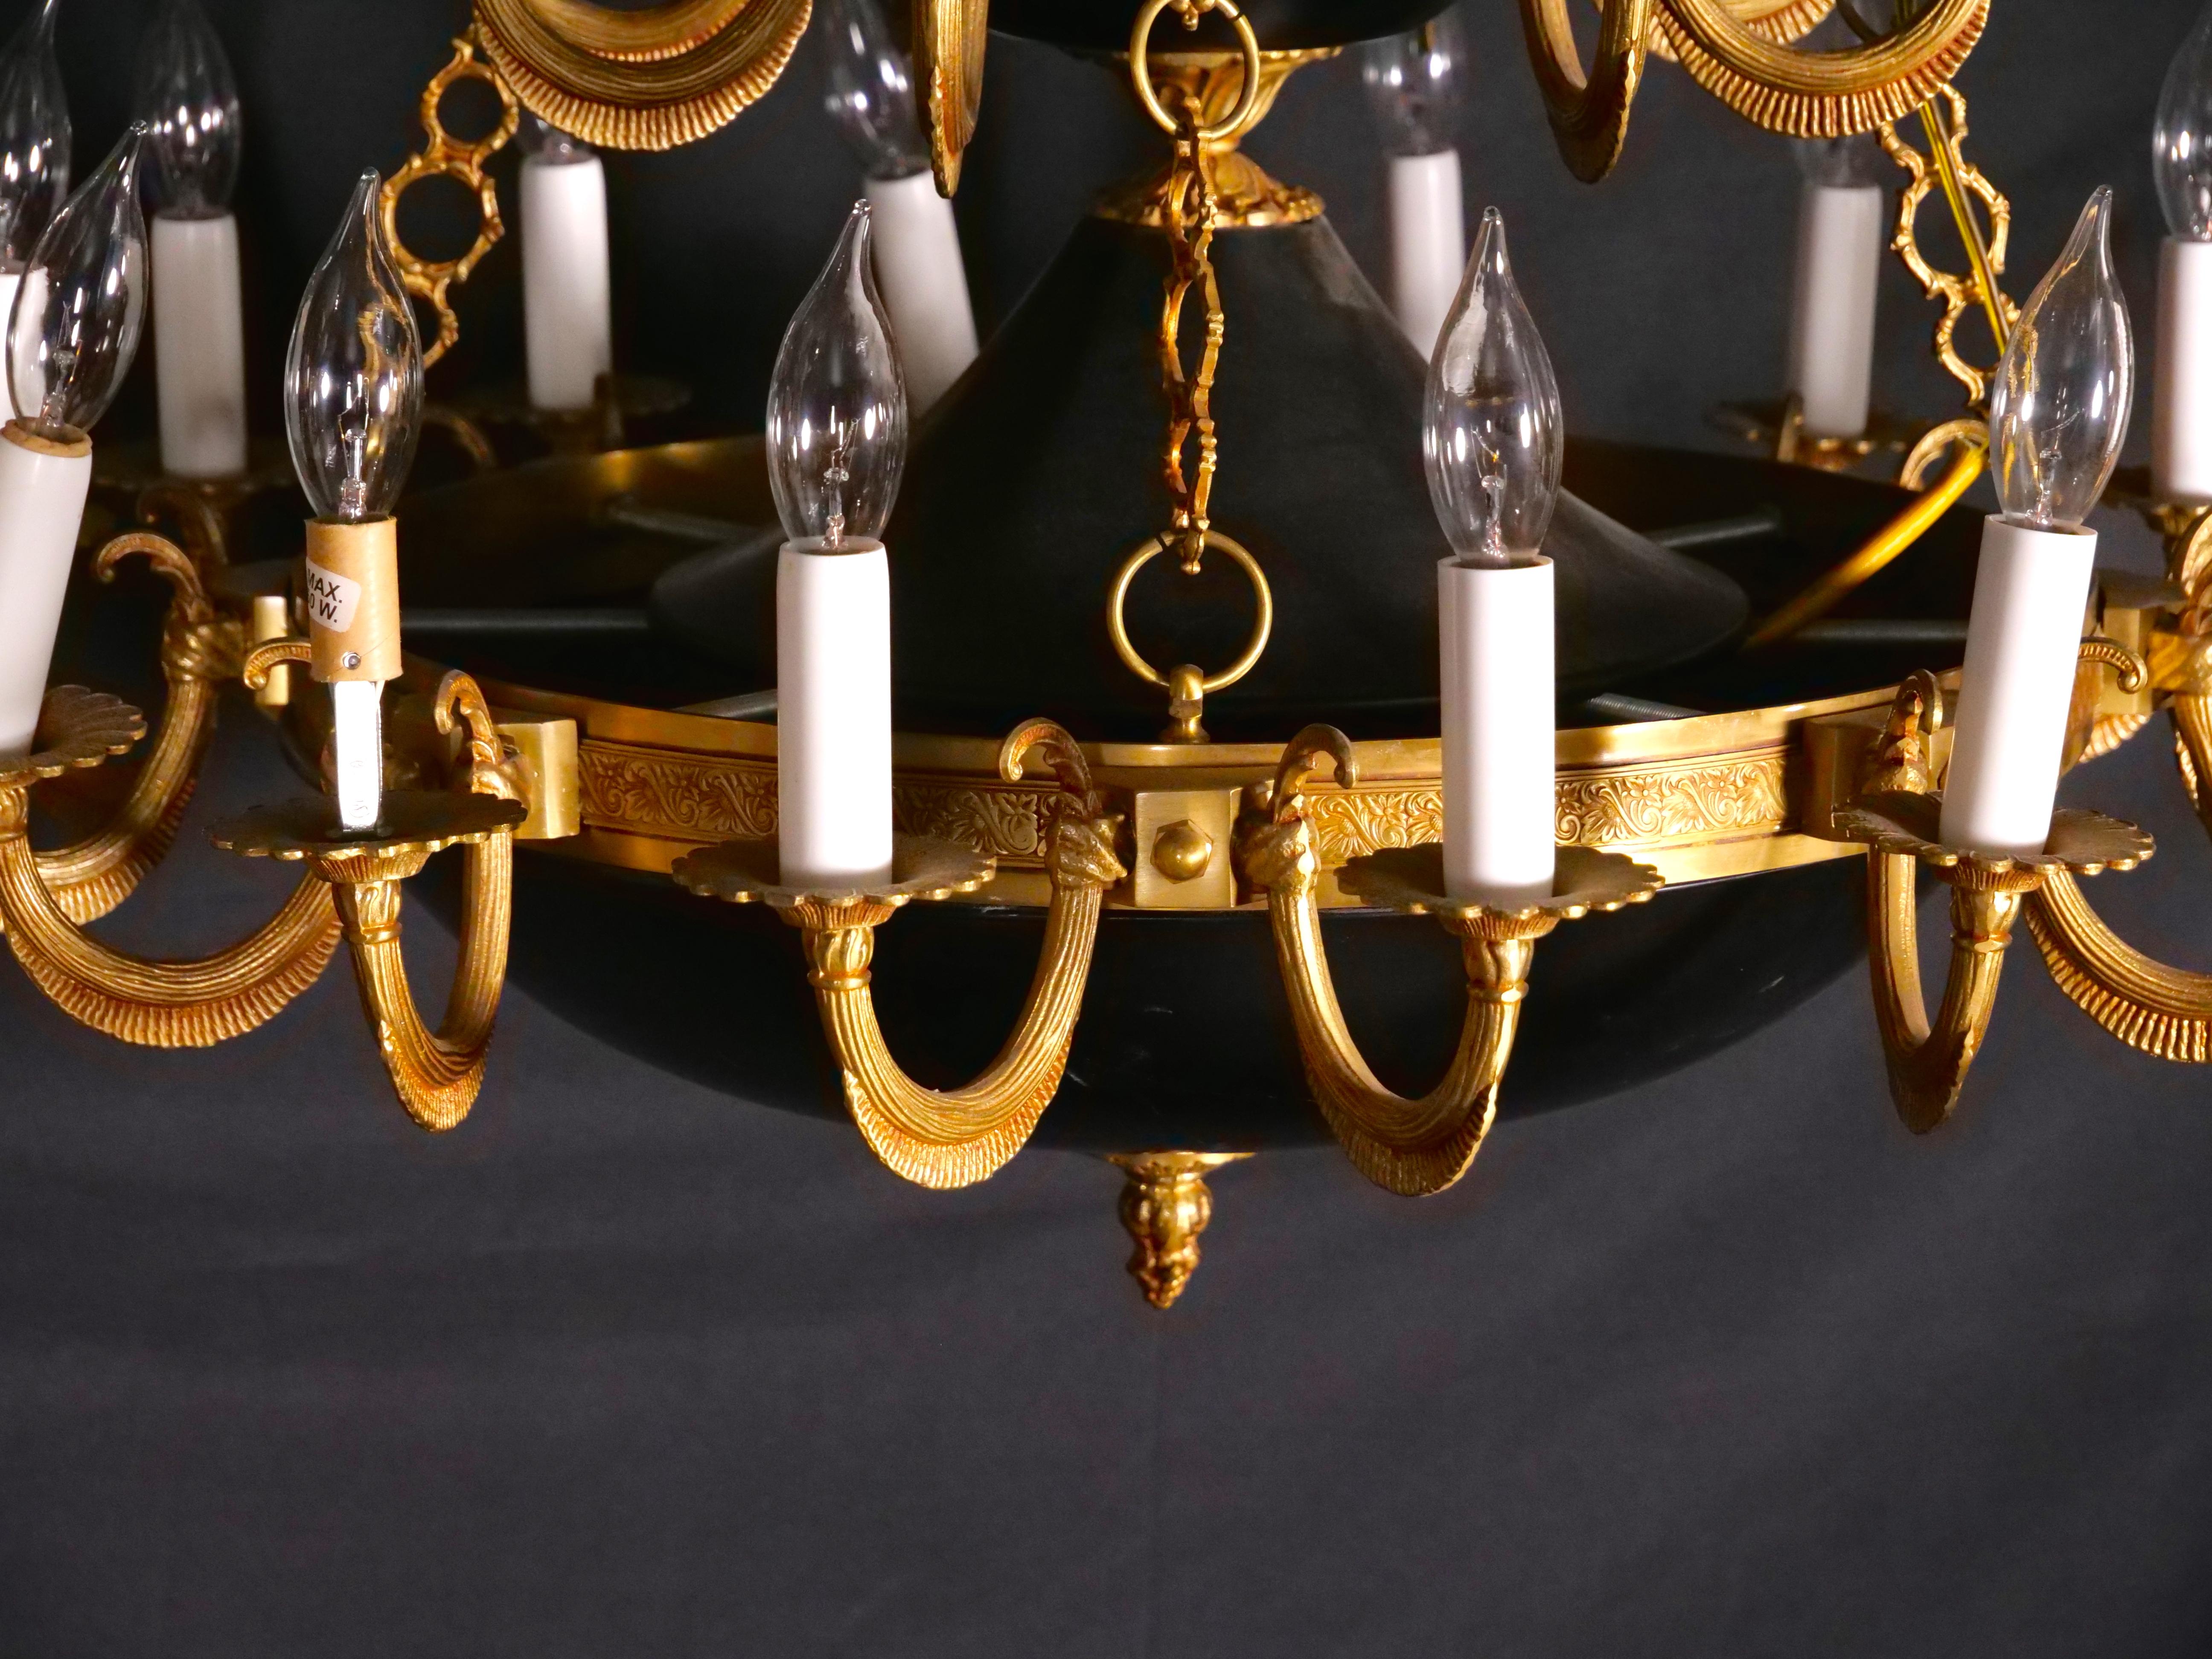 19th Century French Empire Style 24-Light Gilt Bronze / Patinated Chandelier For Sale 4